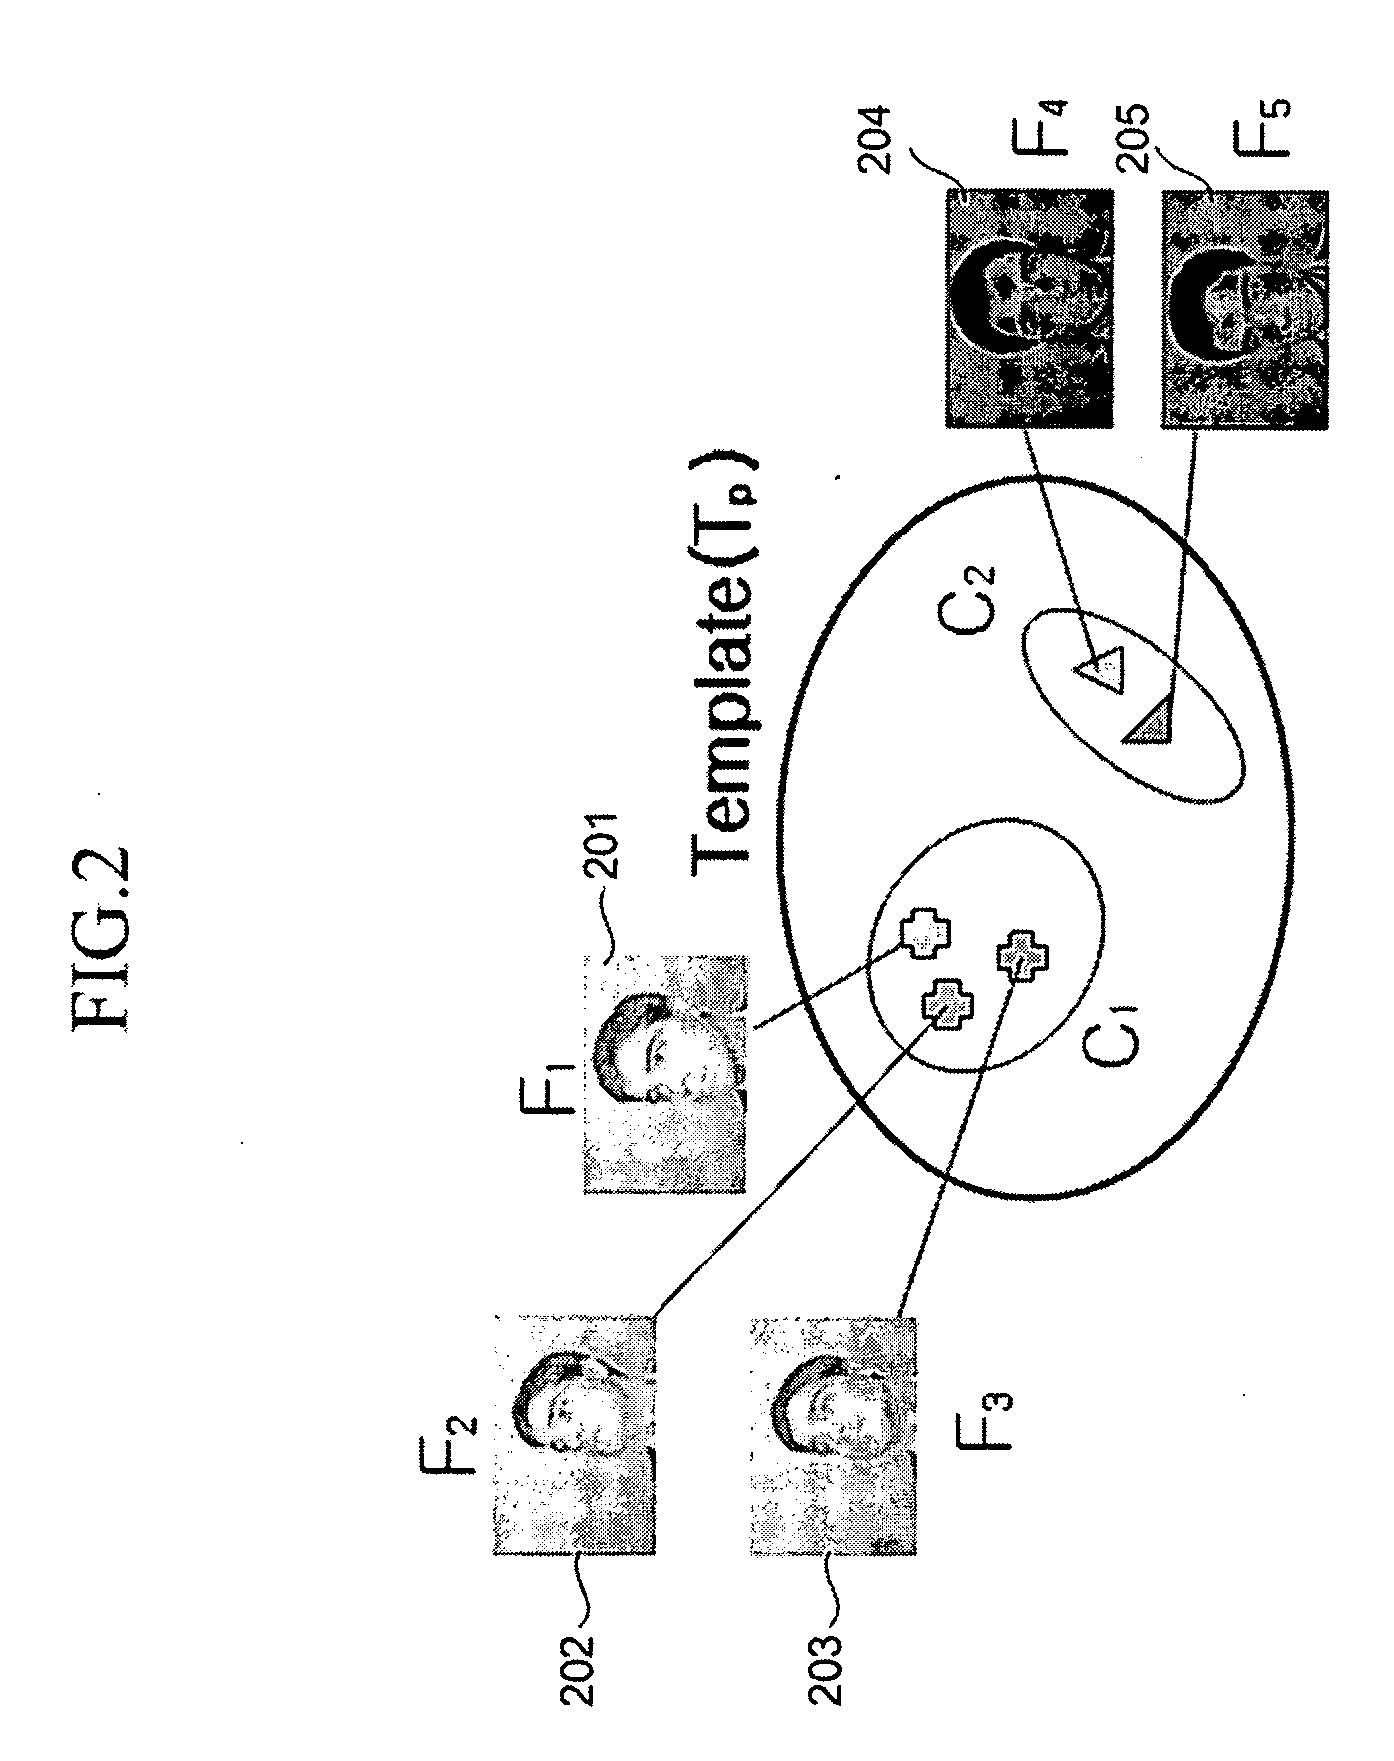 User recognition system and method thereof